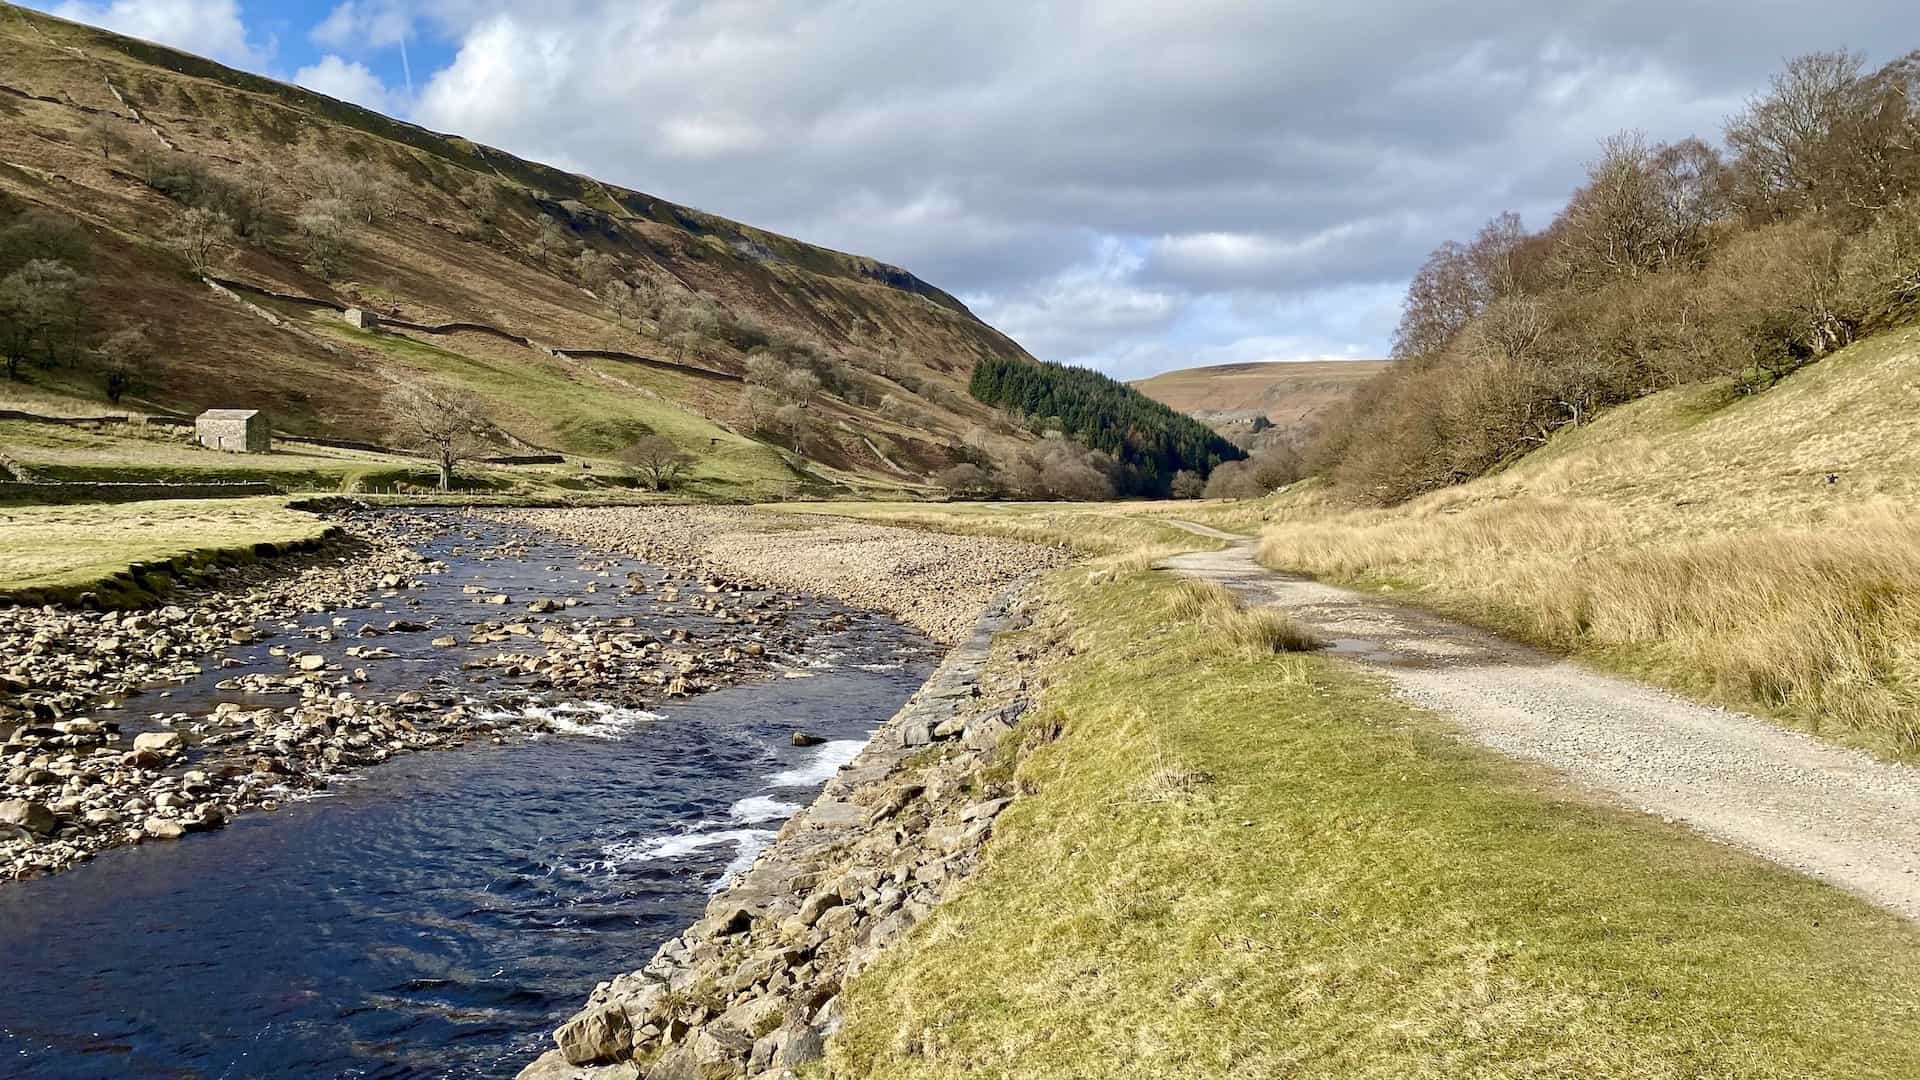 The majority of the Yorkshire Dales National Park, which covers 841 square miles, is in North Yorkshire, with a sizeable area in Cumbria and a small part in Lancashire. The national park status was designated in 1954 and the westward extension into Lancashire and Cumbria occurred in 2016.